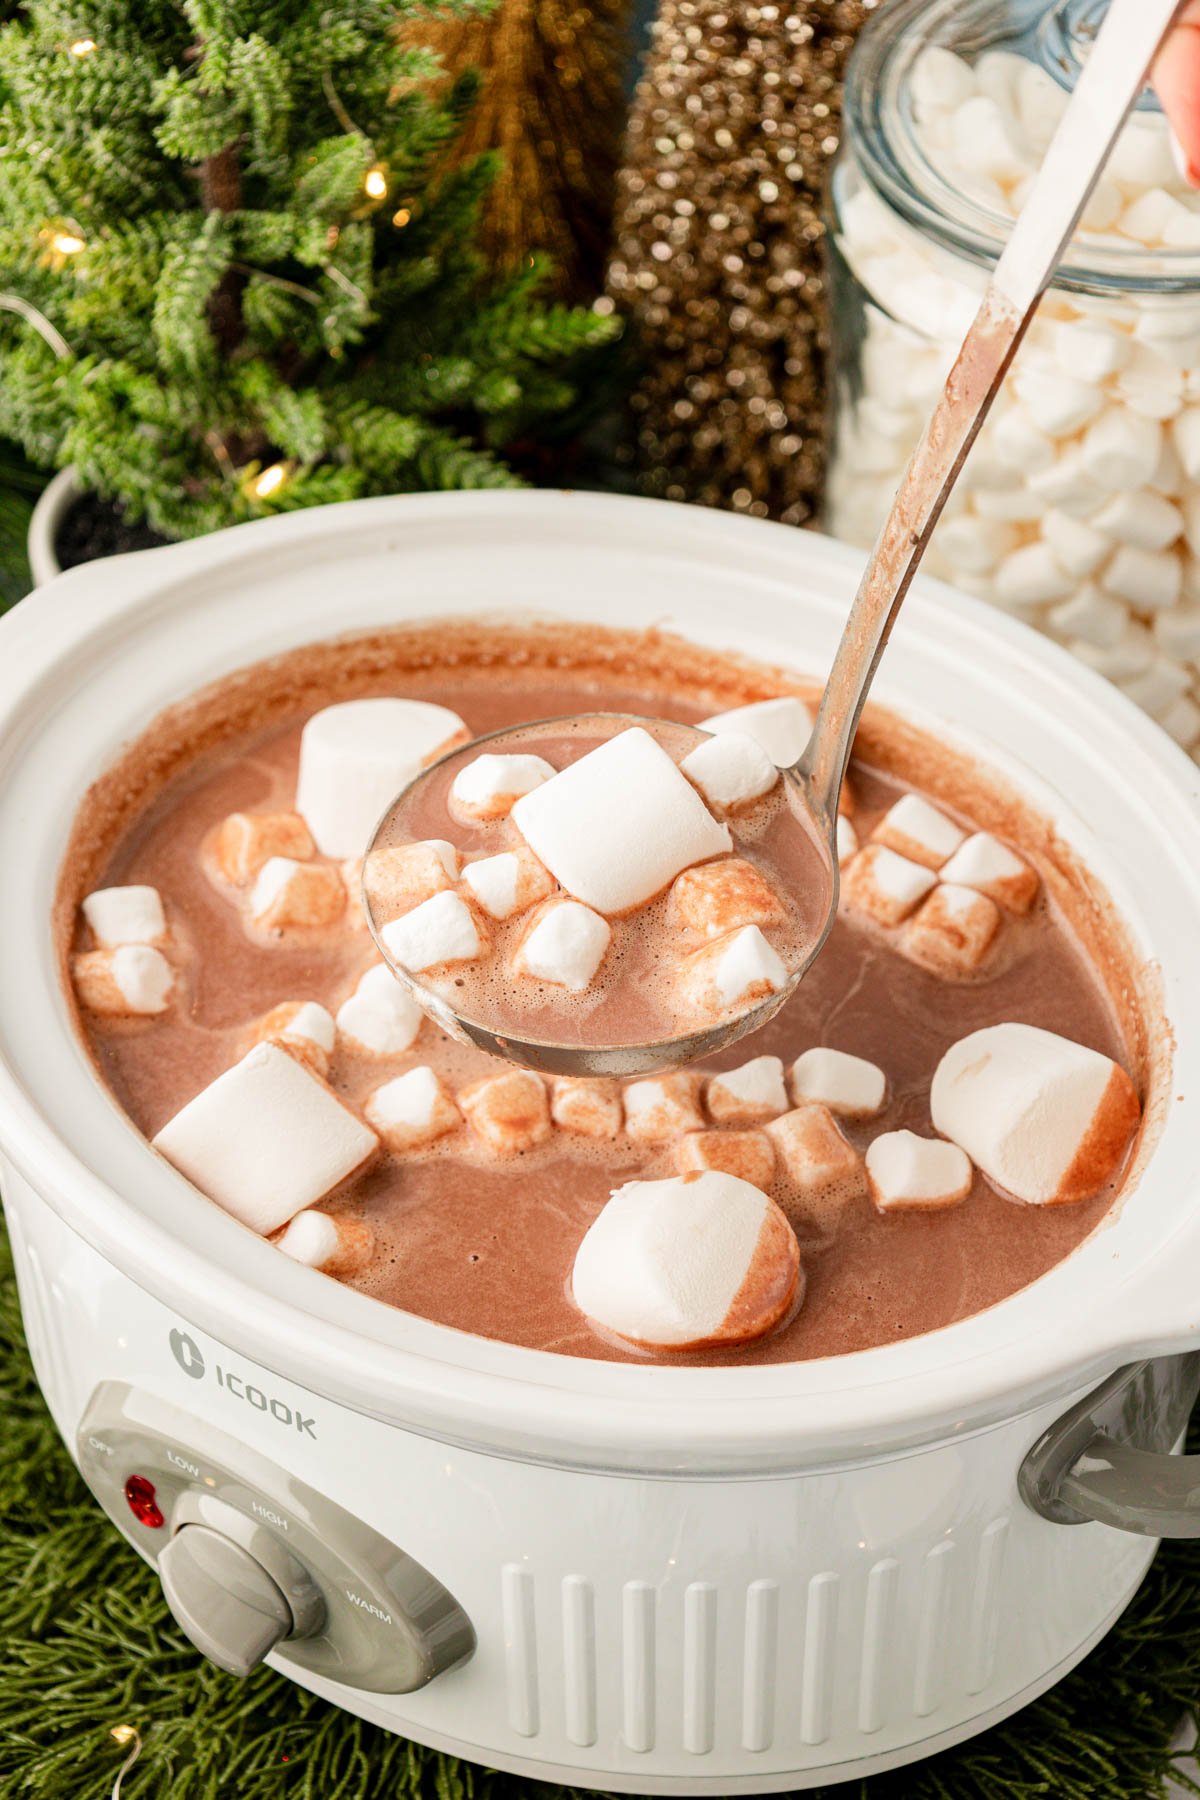 A crockpot full of hot chocolate with a ladle scooping some out.